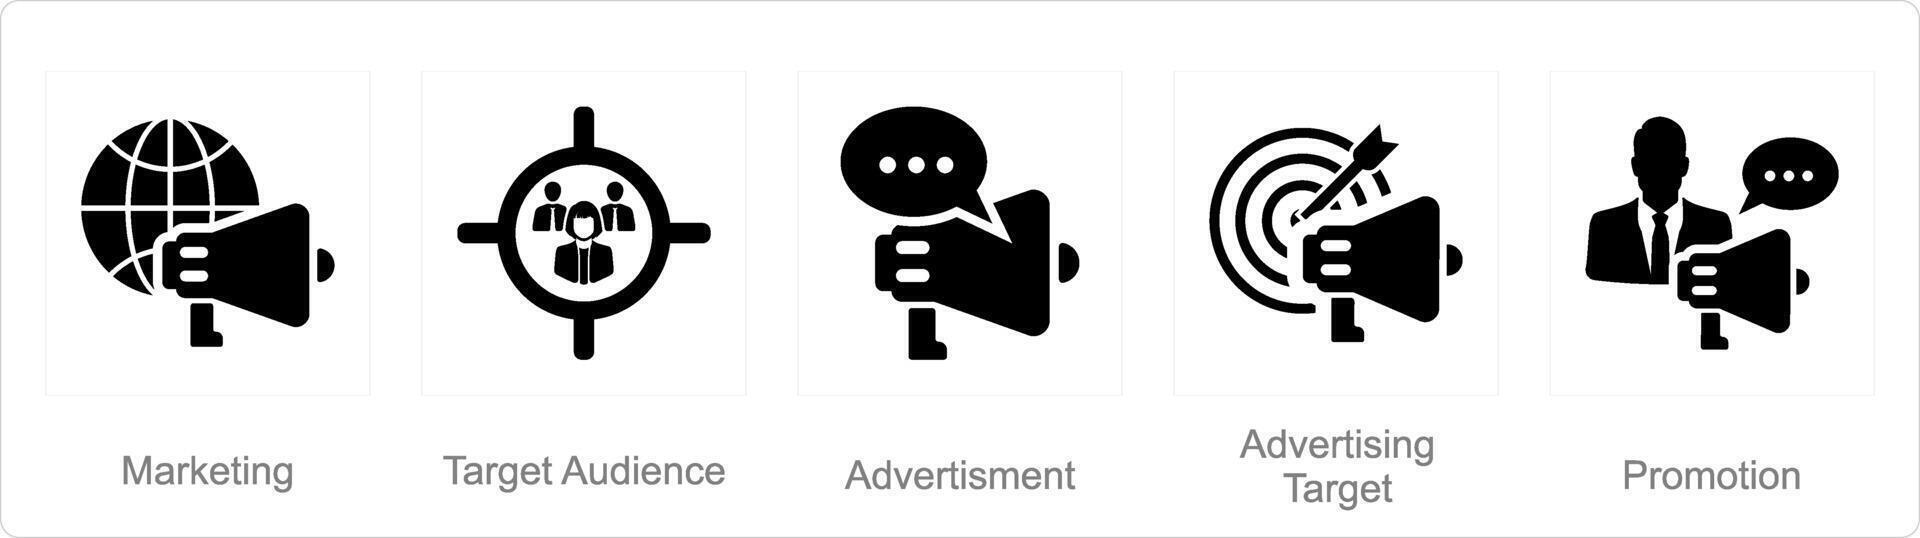 A set of 5 Branding icons as marketing, target audience, advertisement vector